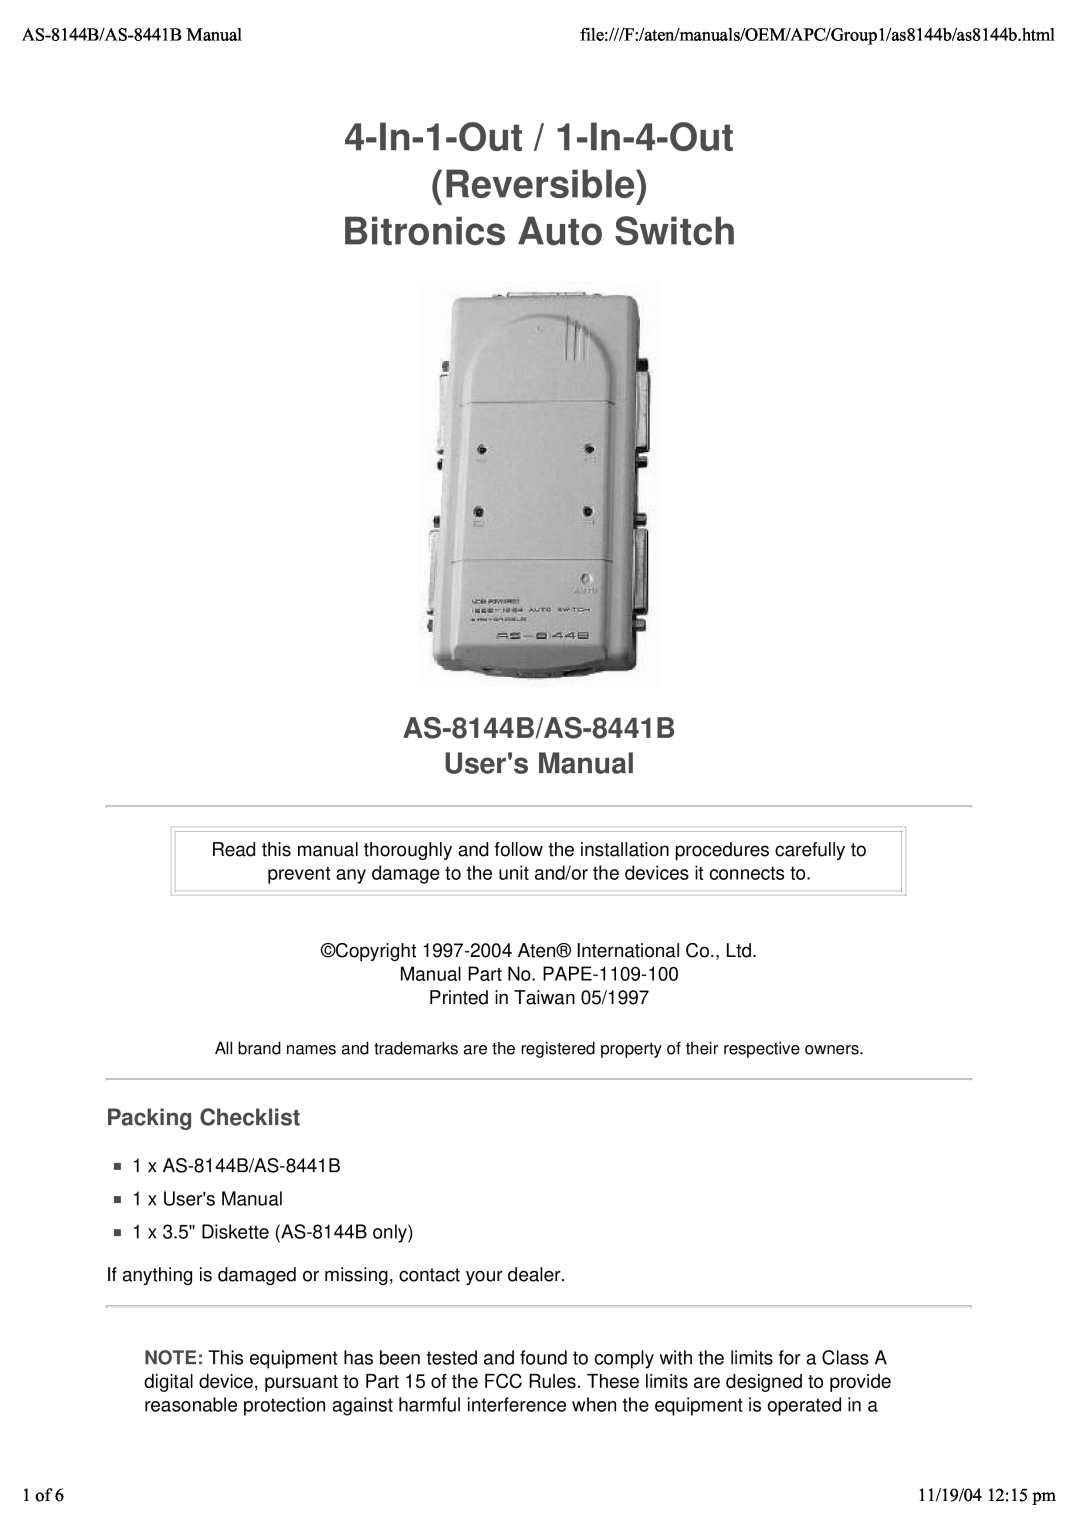 ATEN Technology AS-8441B, AS-8144B user manual Packing Checklist, 4-In-1-Out / 1-In-4-Out Reversible Bitronics Auto Switch 